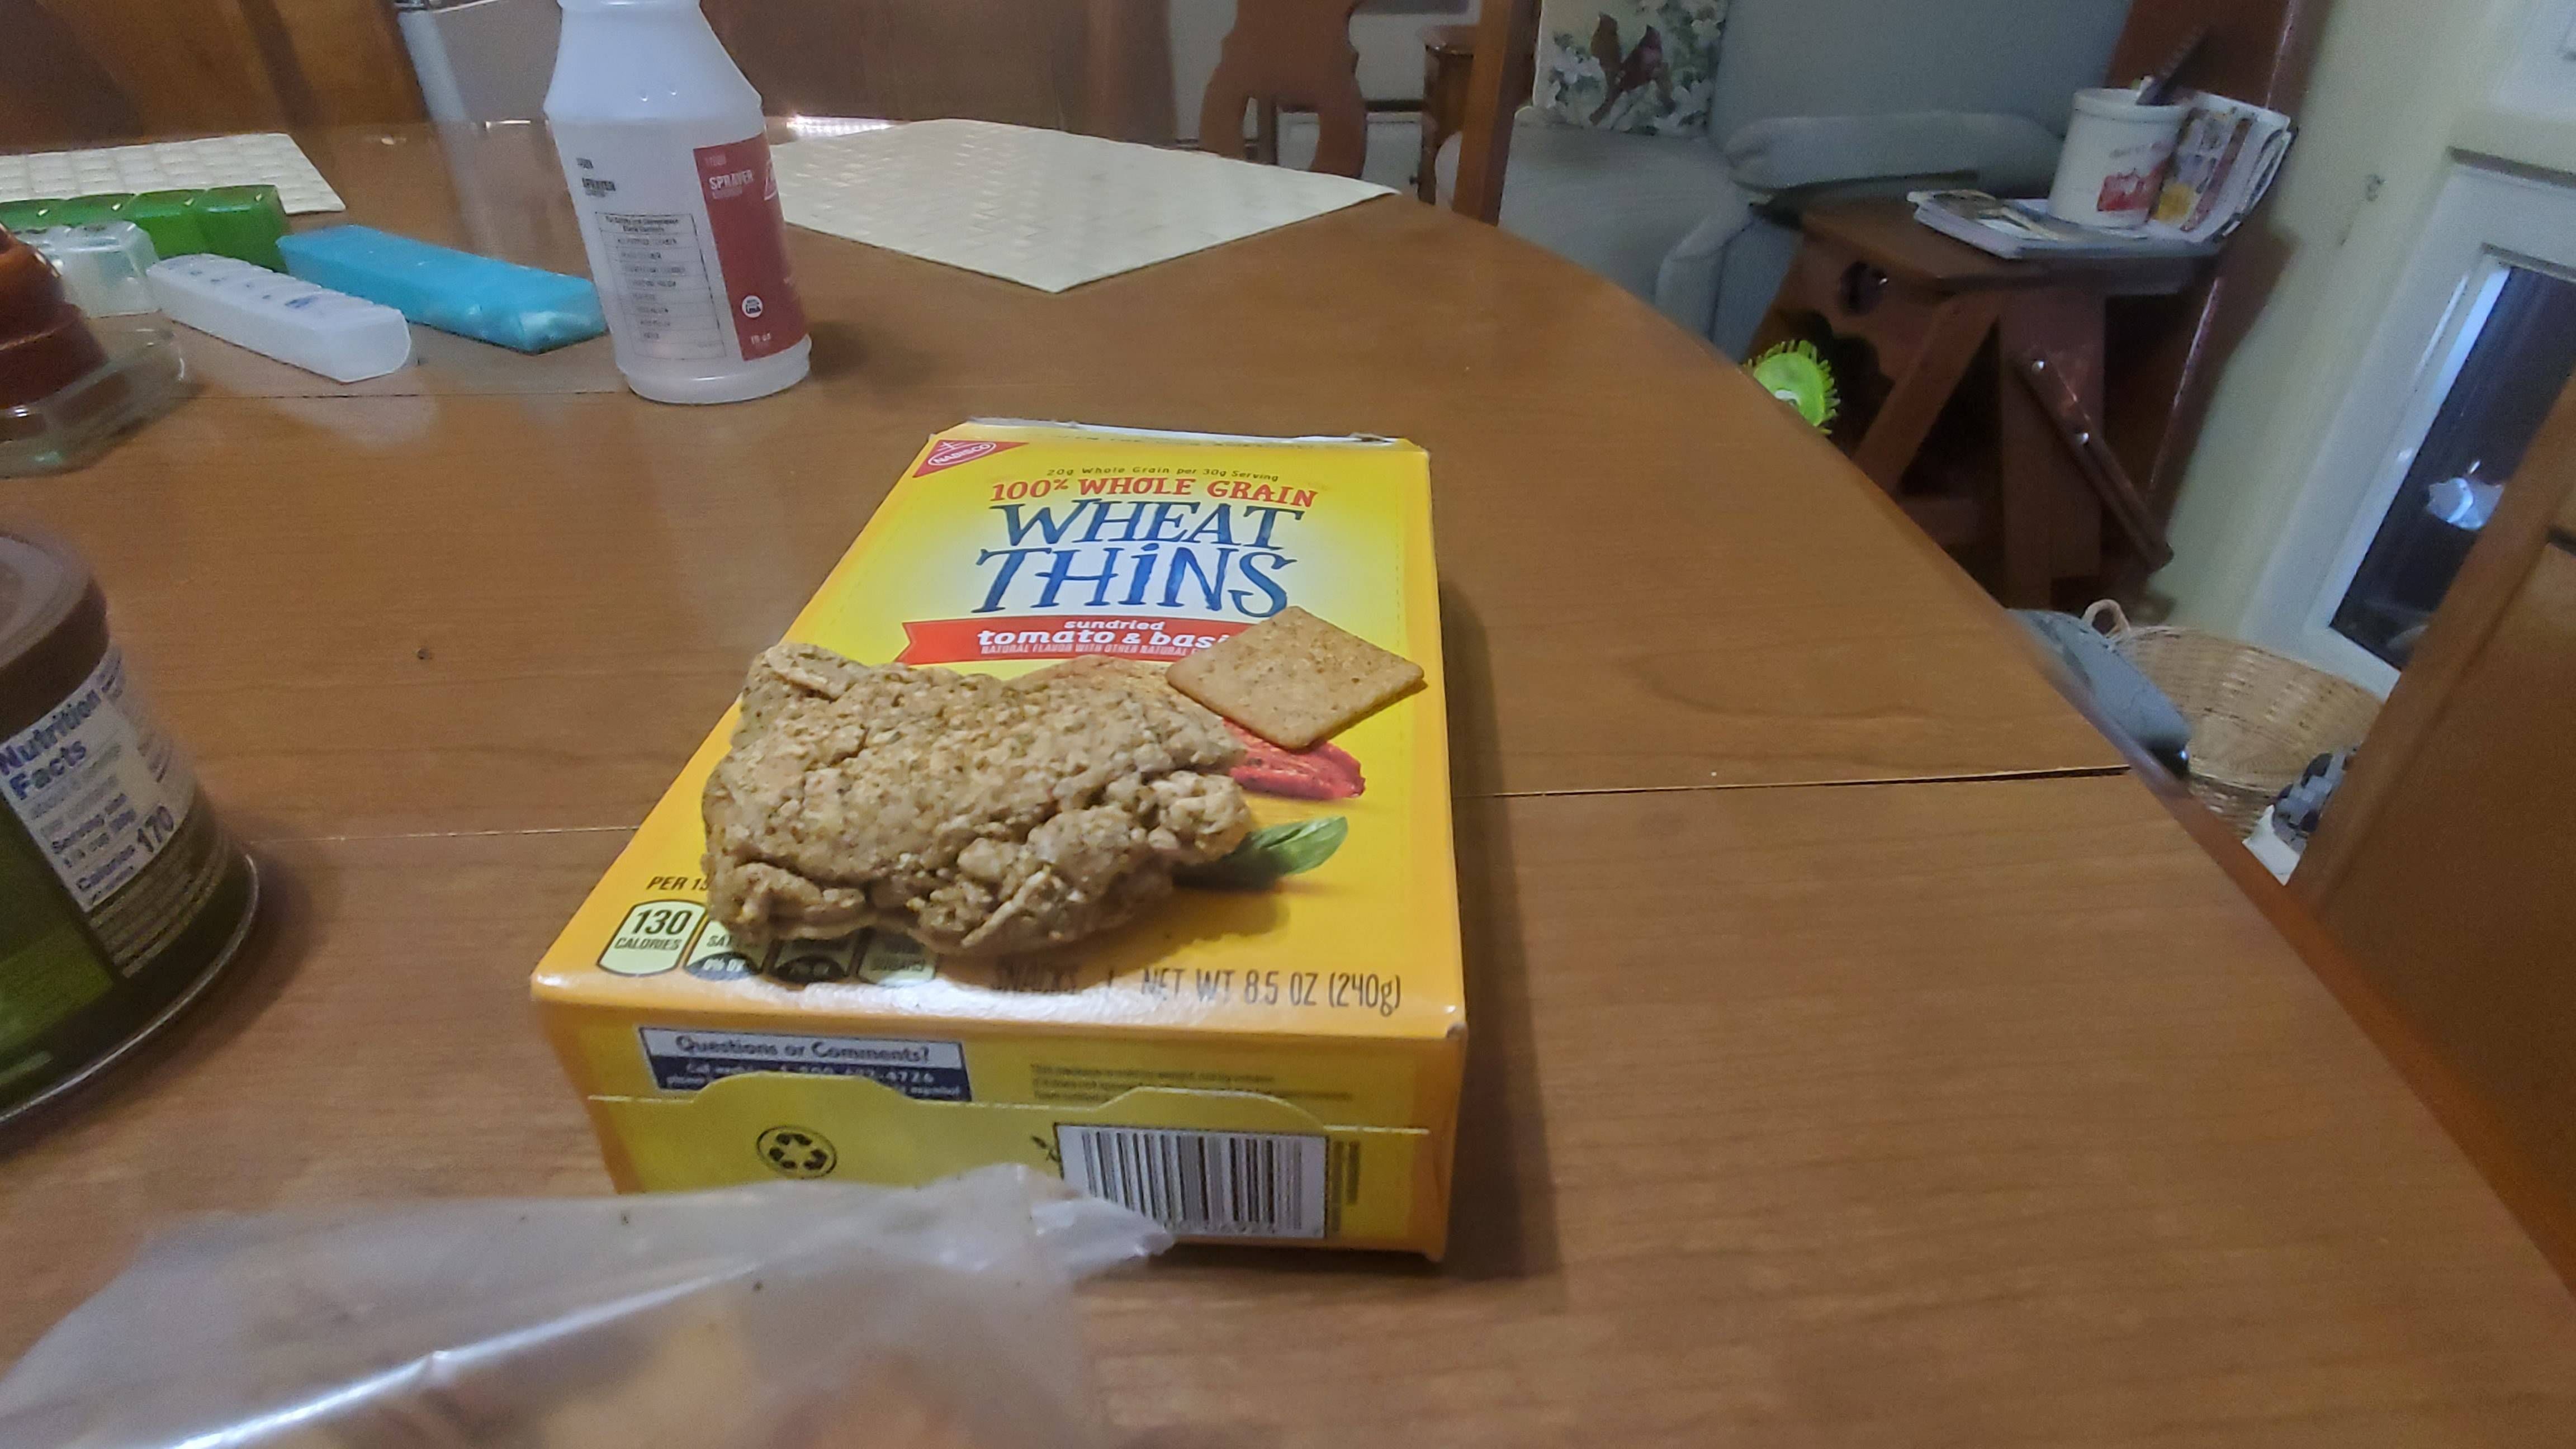 This was in my box of Wheat "Thins".